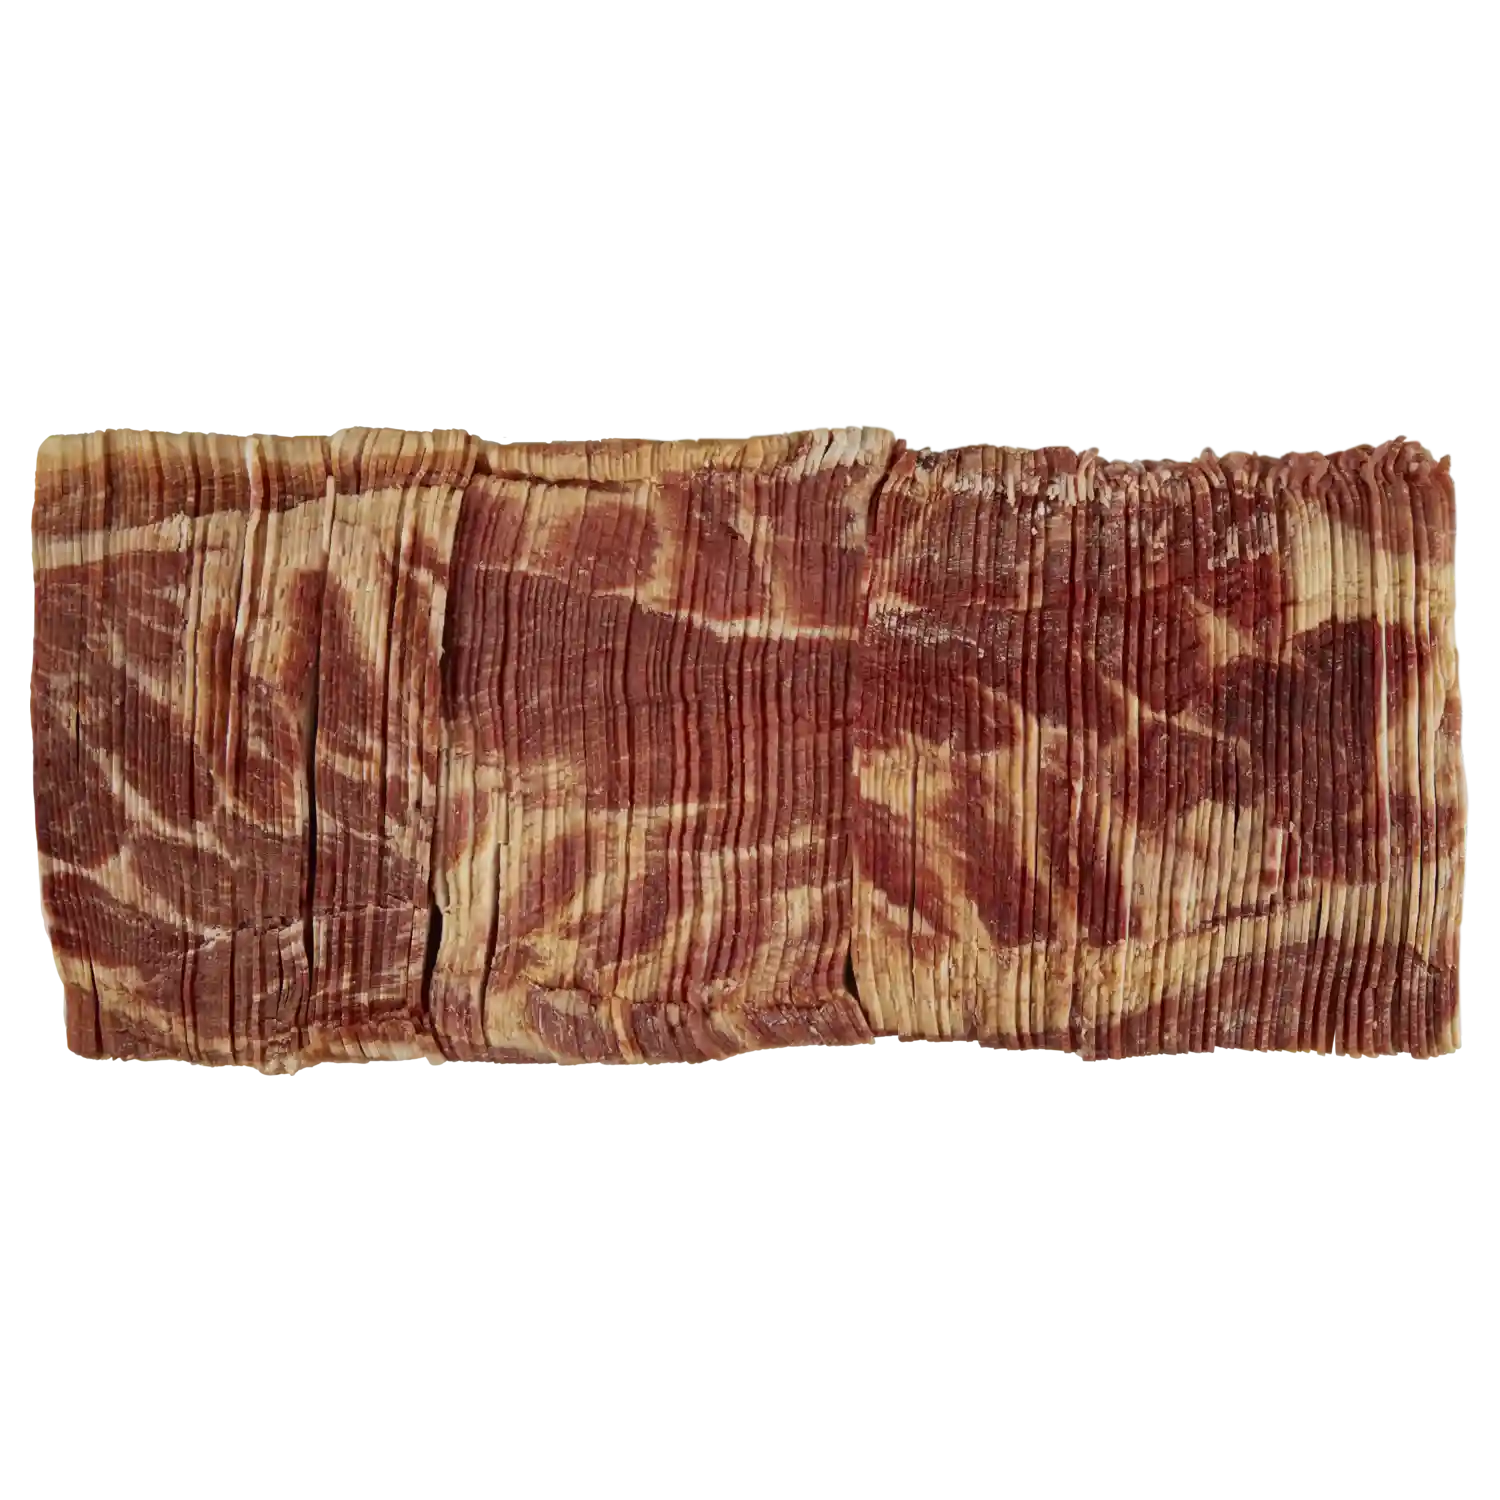 Wright® Brand Naturally Hickory Smoked Thin Sliced Bacon, Bulk, 30 Lbs, 18-22 Slices per Pound, Frozen_image_31